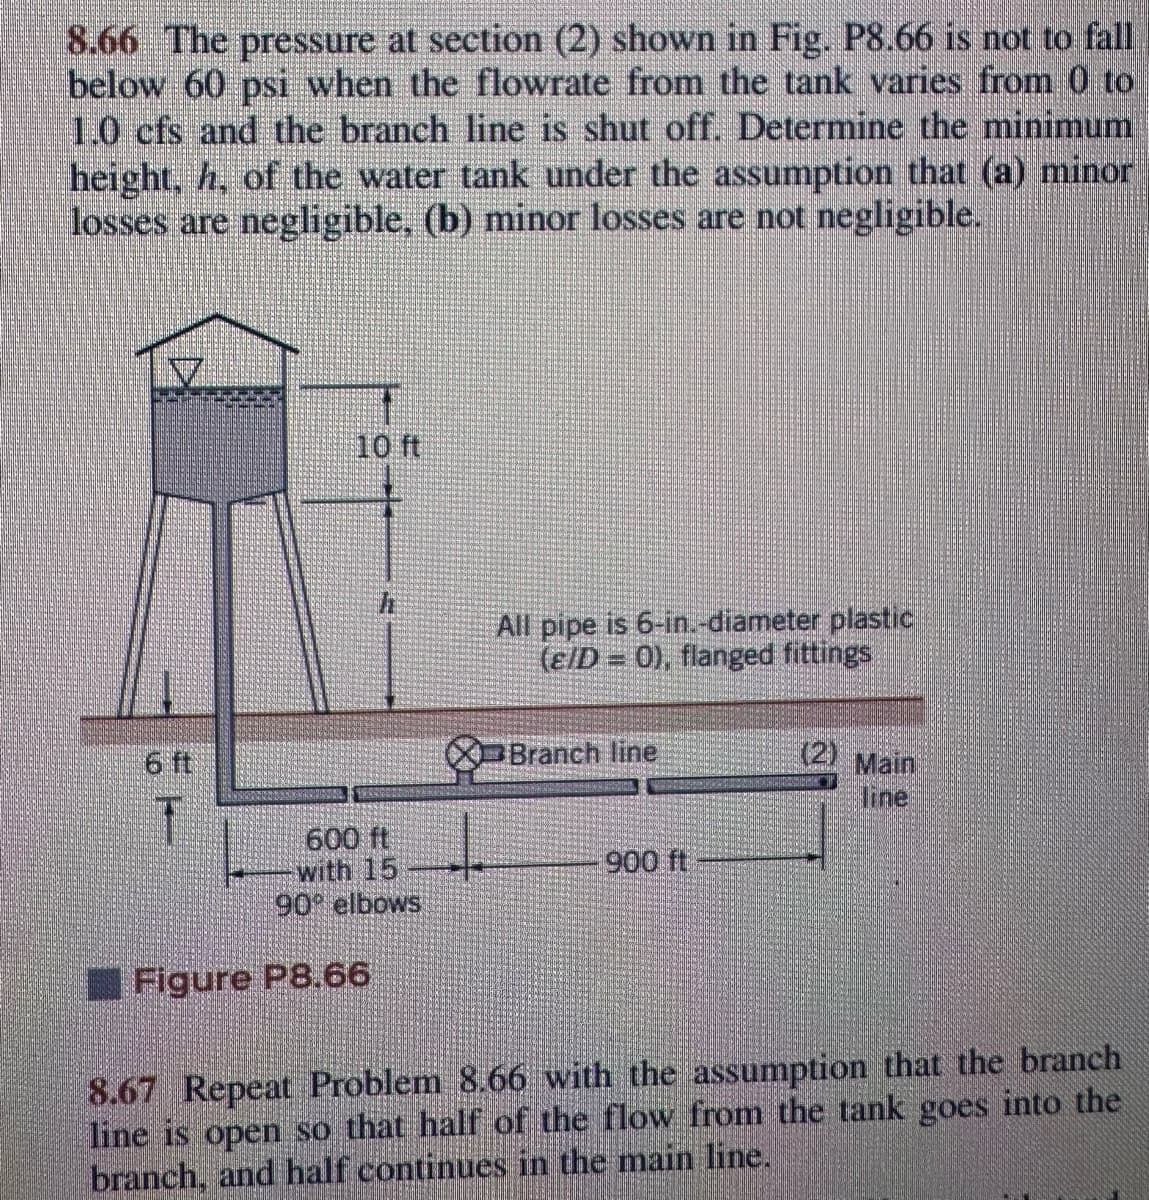 8.66 The pressure at section (2) shown in Fig. P8.66 is not to fall
below 60 psi when the flowrate from the tank varies from 0 to
1.0 cfs and the branch line is shut off. Determine the minimum
height, h, of the water tank under the assumption that (a) minor
losses are negligible, (b) minor losses are not negligible.
10 ft
h
All pipe is 6-in.-diameter plastic
(E/D=0), flanged fittings
6 ft
T
600 ft
with 15
90° elbows
Figure P8.66
Branch line
(2)
Main
line
900 ft
8.67 Repeat Problem 8.66 with the assumption that the branch
line is open so that half of the flow from the tank goes into the
branch, and half continues in the main line.